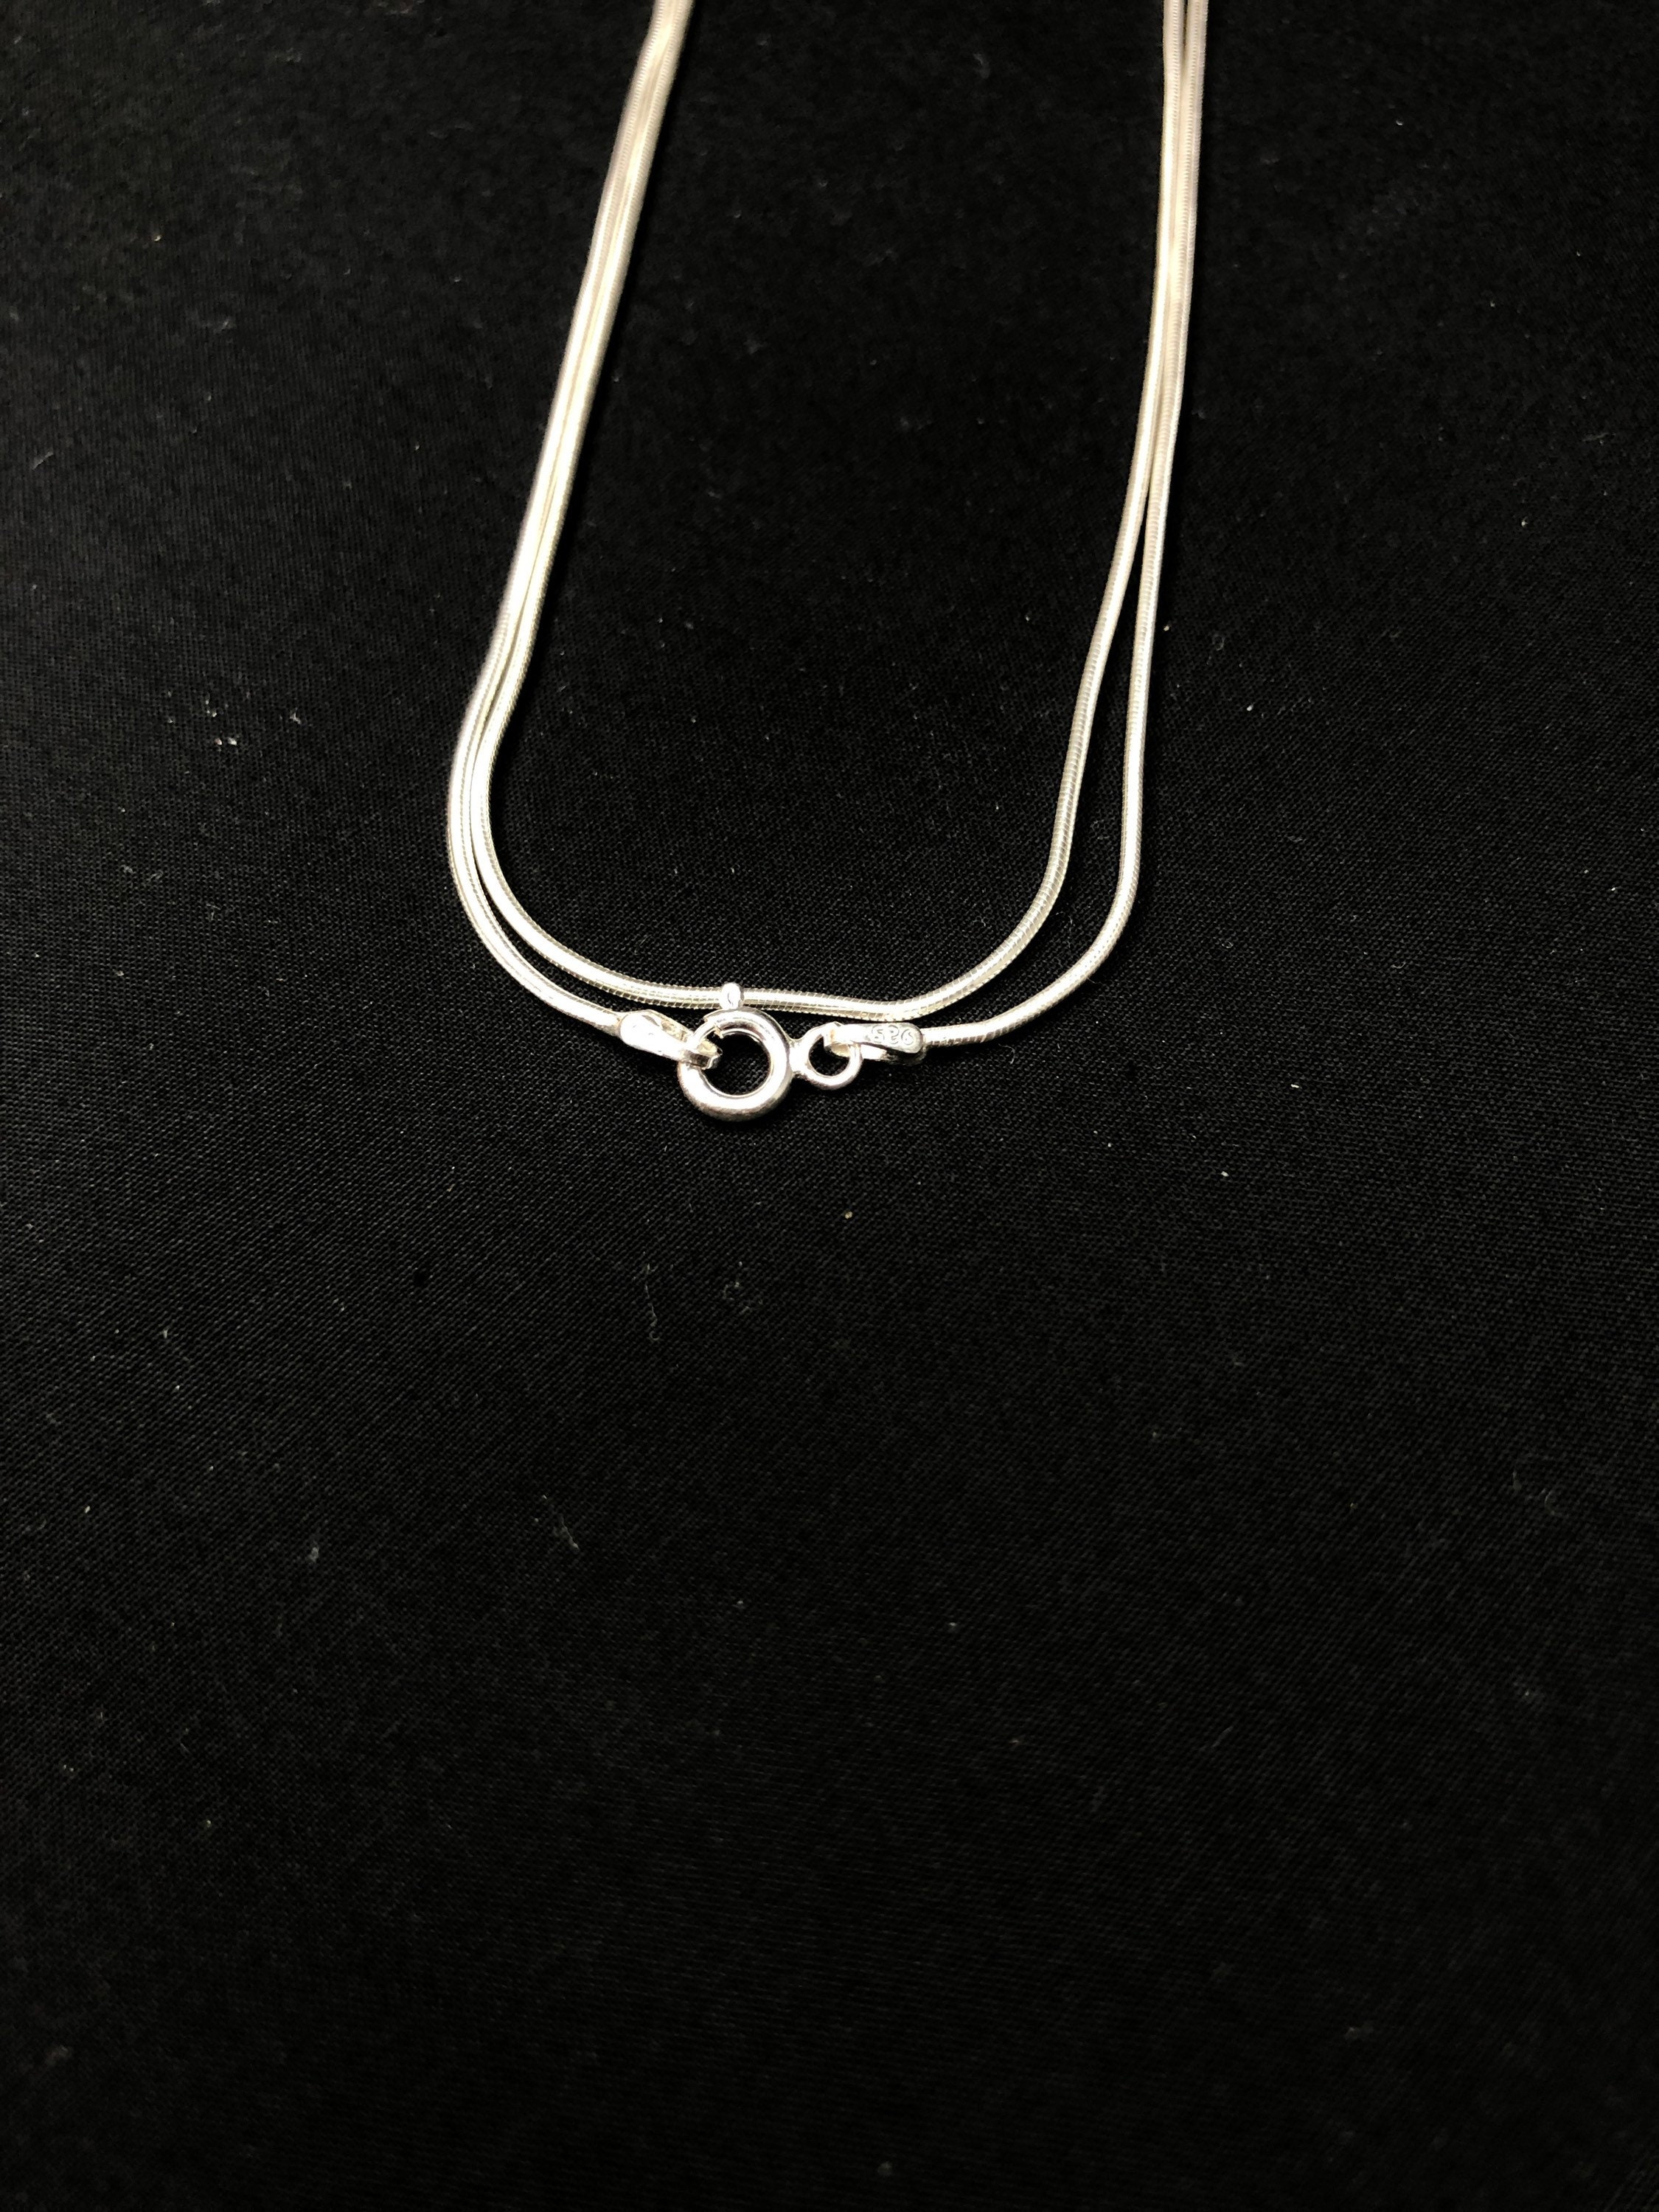 Snake Chain Necklace - Sterling Silver 1.5 mm - 18” - Polished – LOUPN